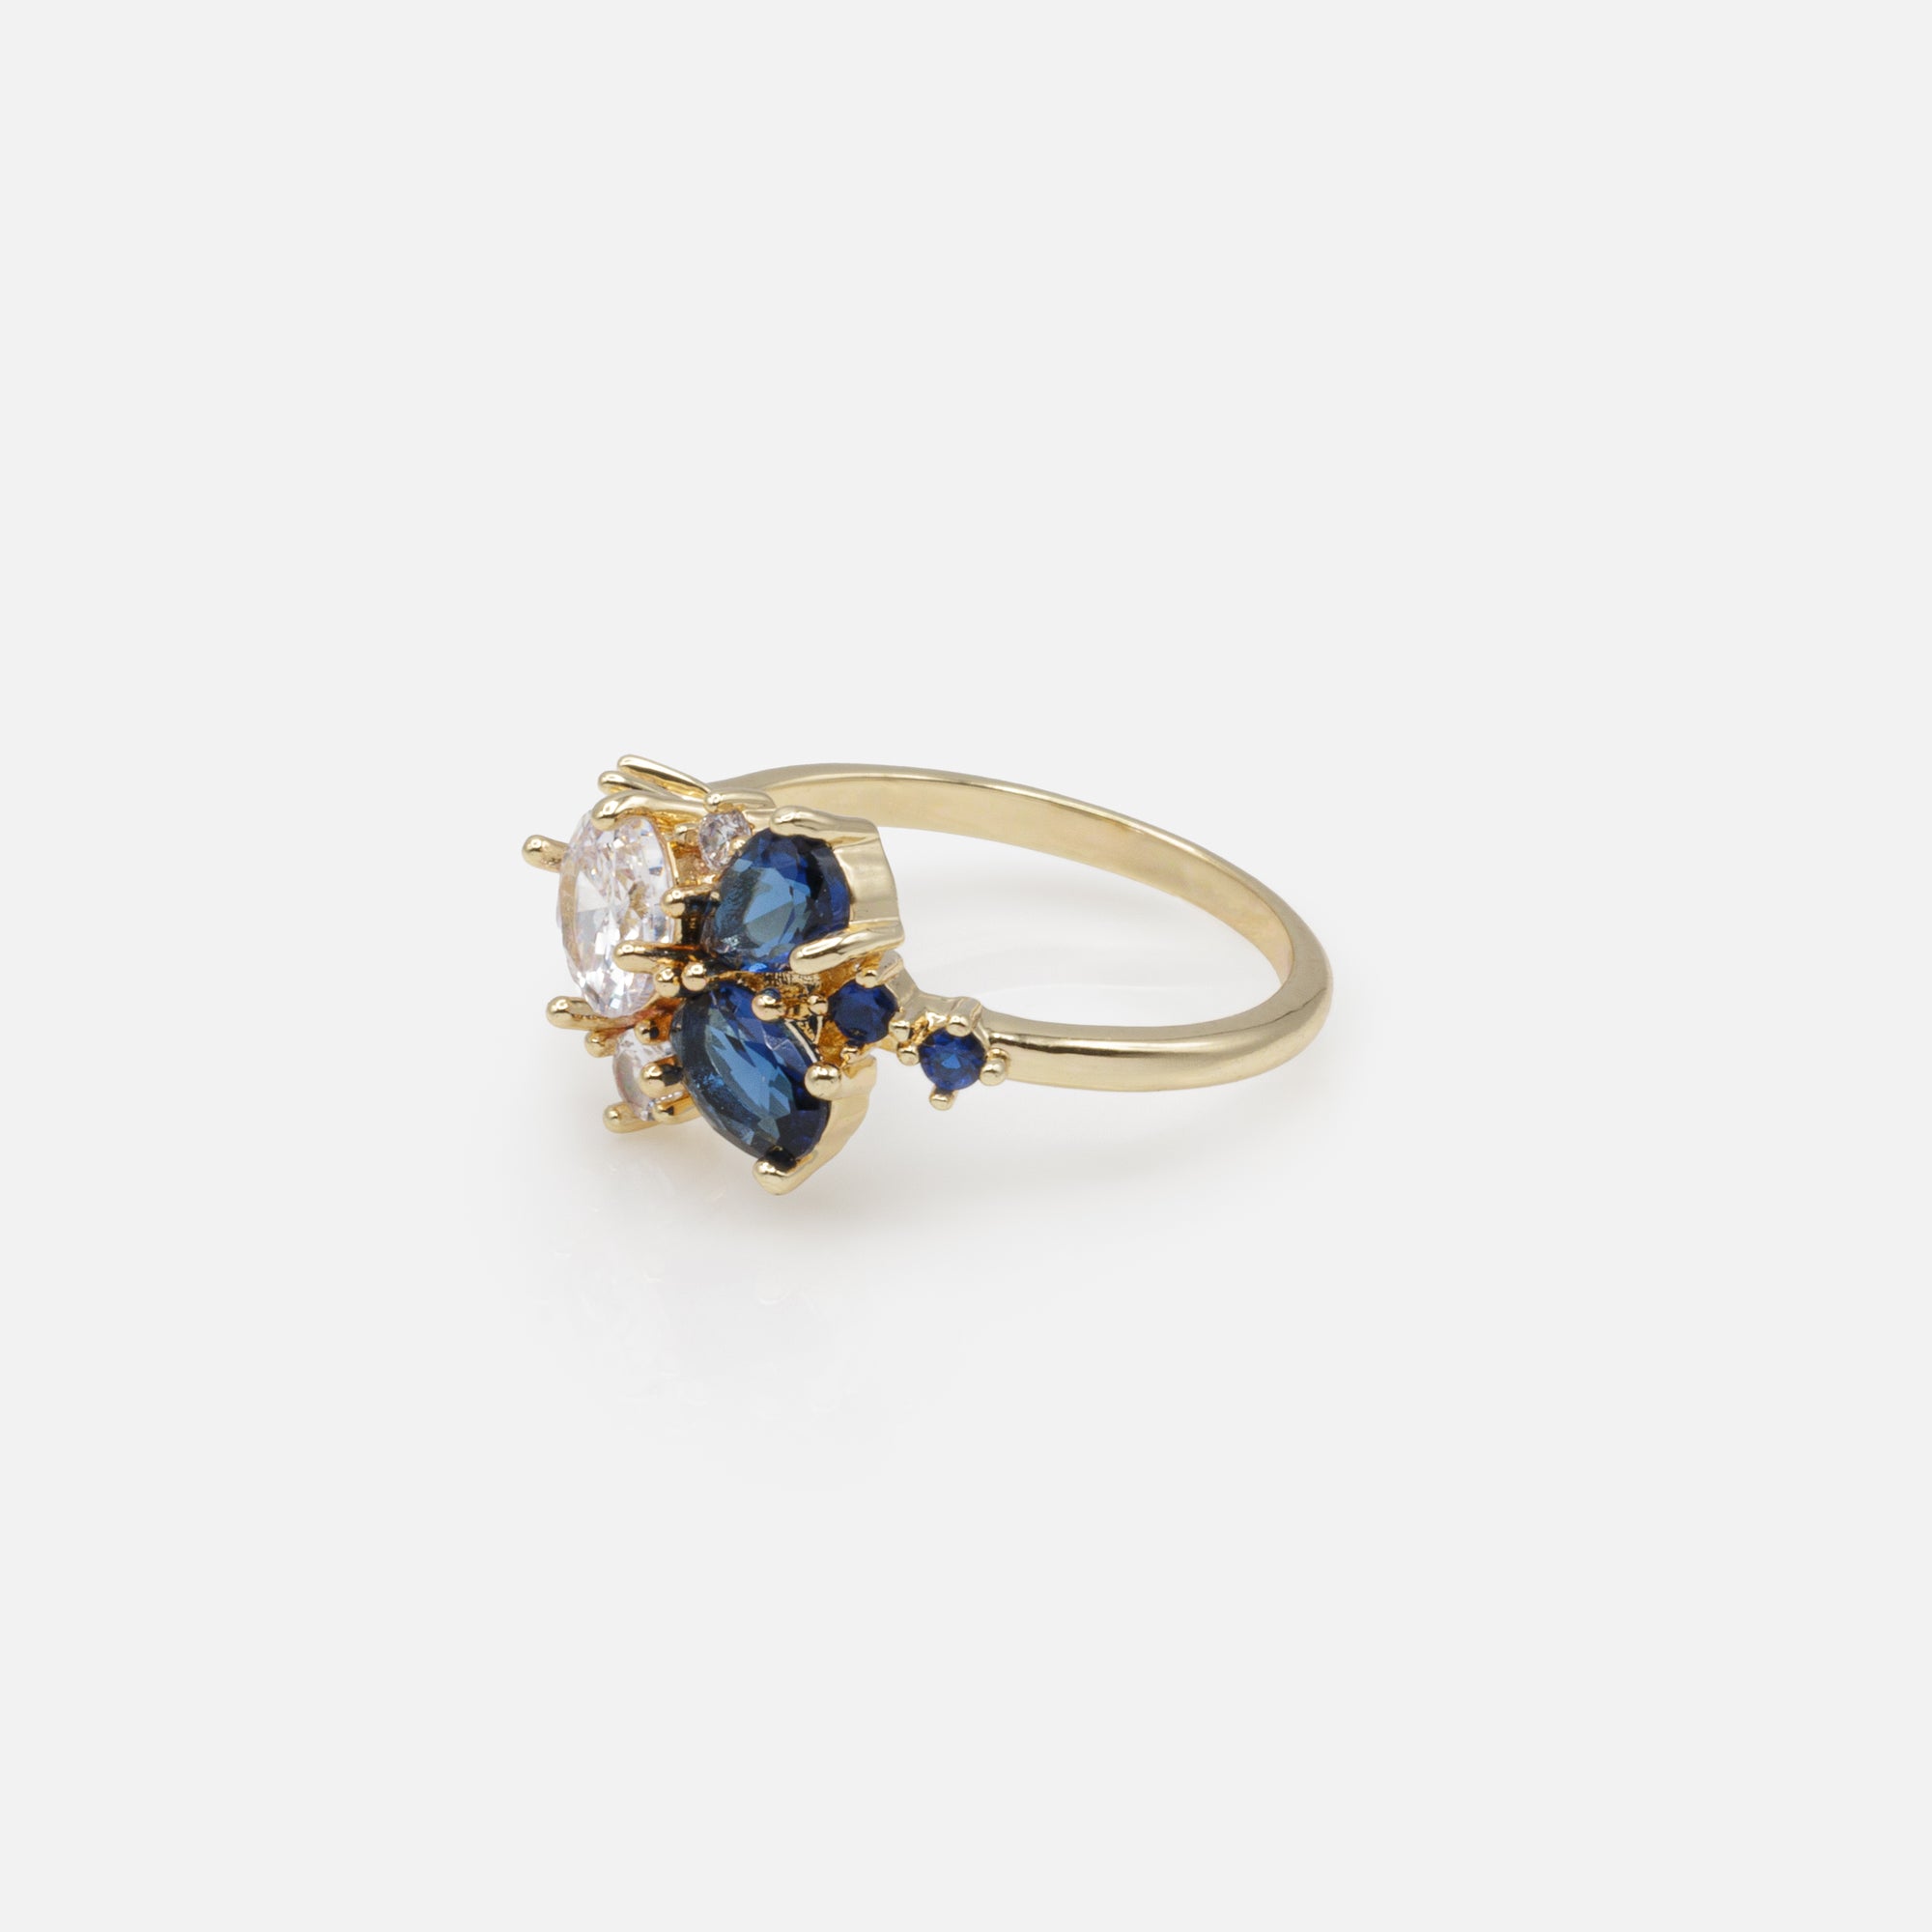 Golden ring blooming with navy and white stones